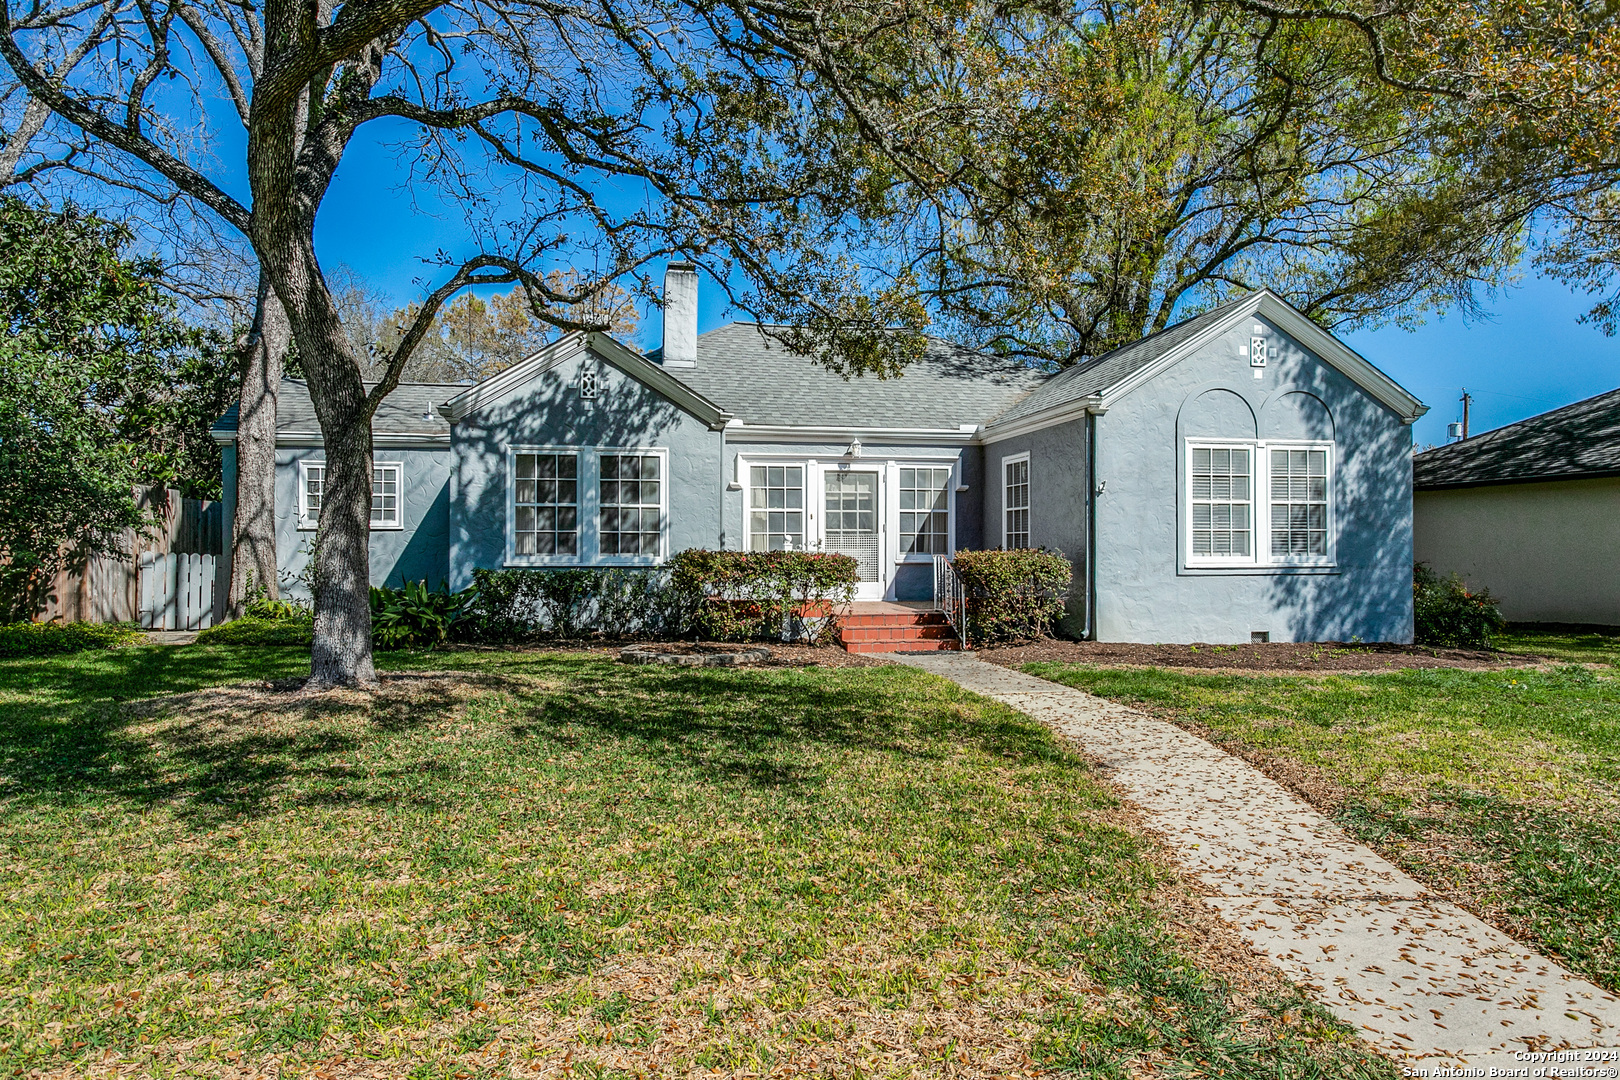 Photo of 143 Cloverleaf Ave in Alamo Heights, TX